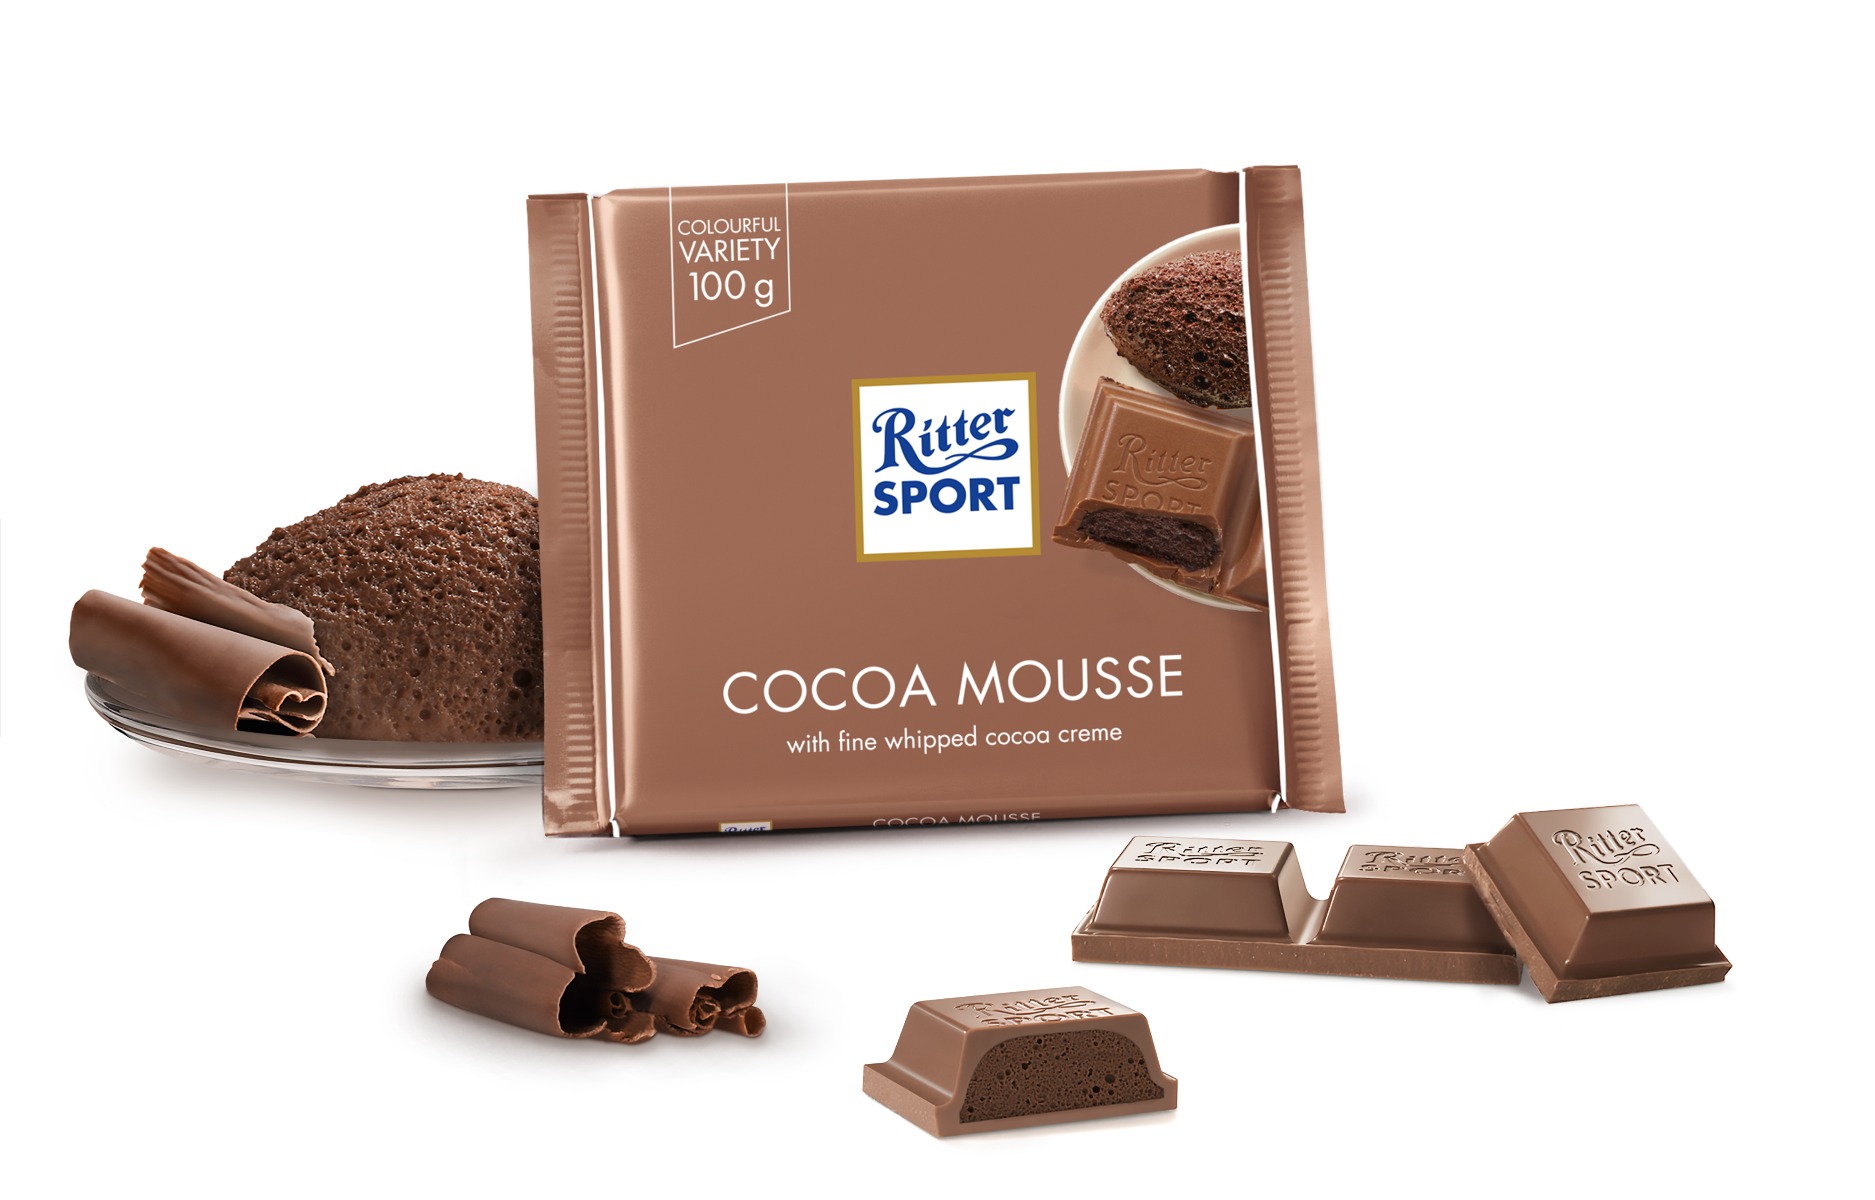 RITTER SPORT: Cocoa Mousse Chocolate Bar, 3.5 oz - 0050255294006